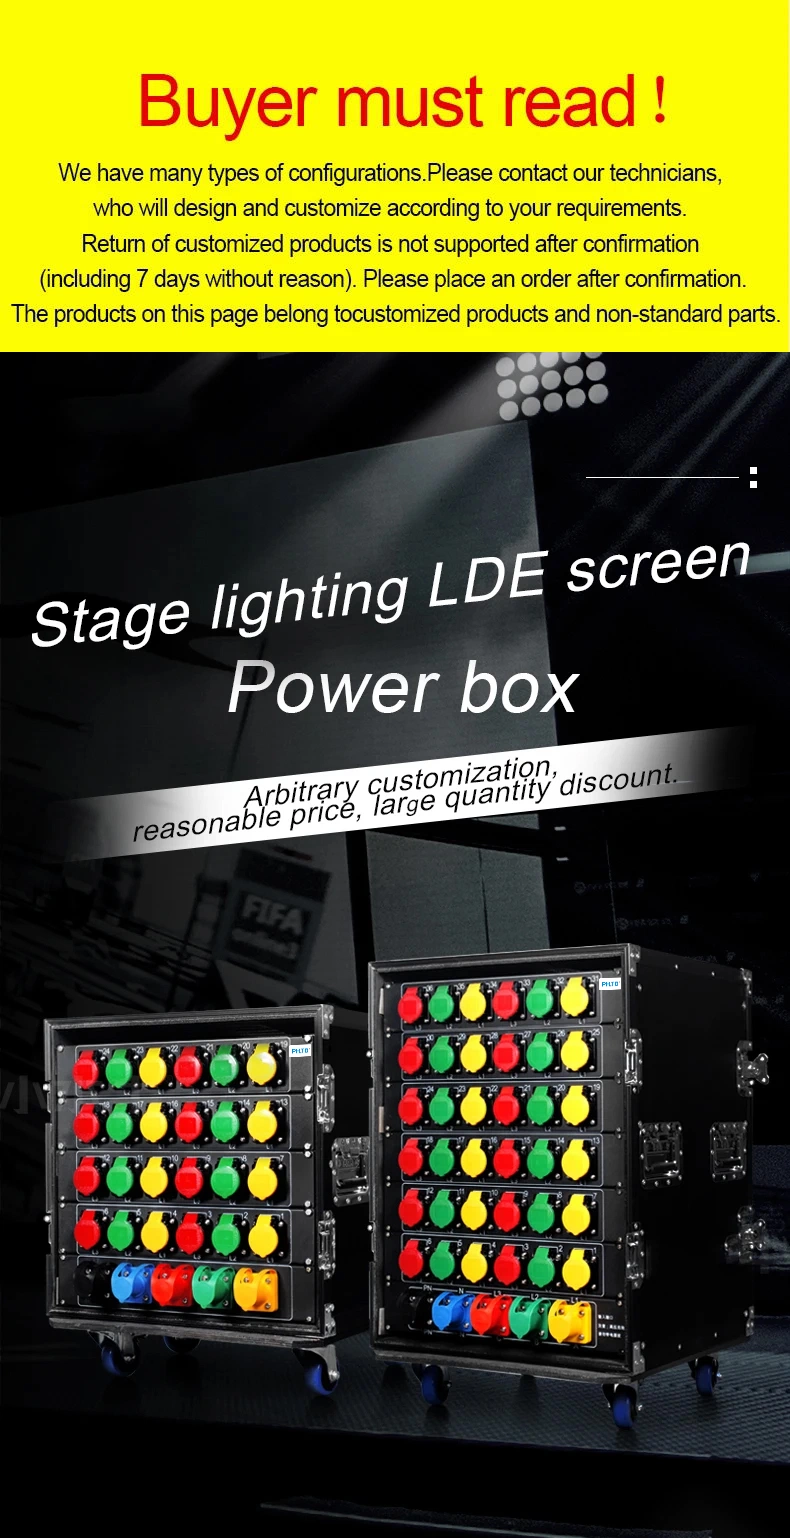 Outdoor Event Stage Big Power Portable Electrical Power Distribution Boxes Distro Box Equipment Box Light Power Control